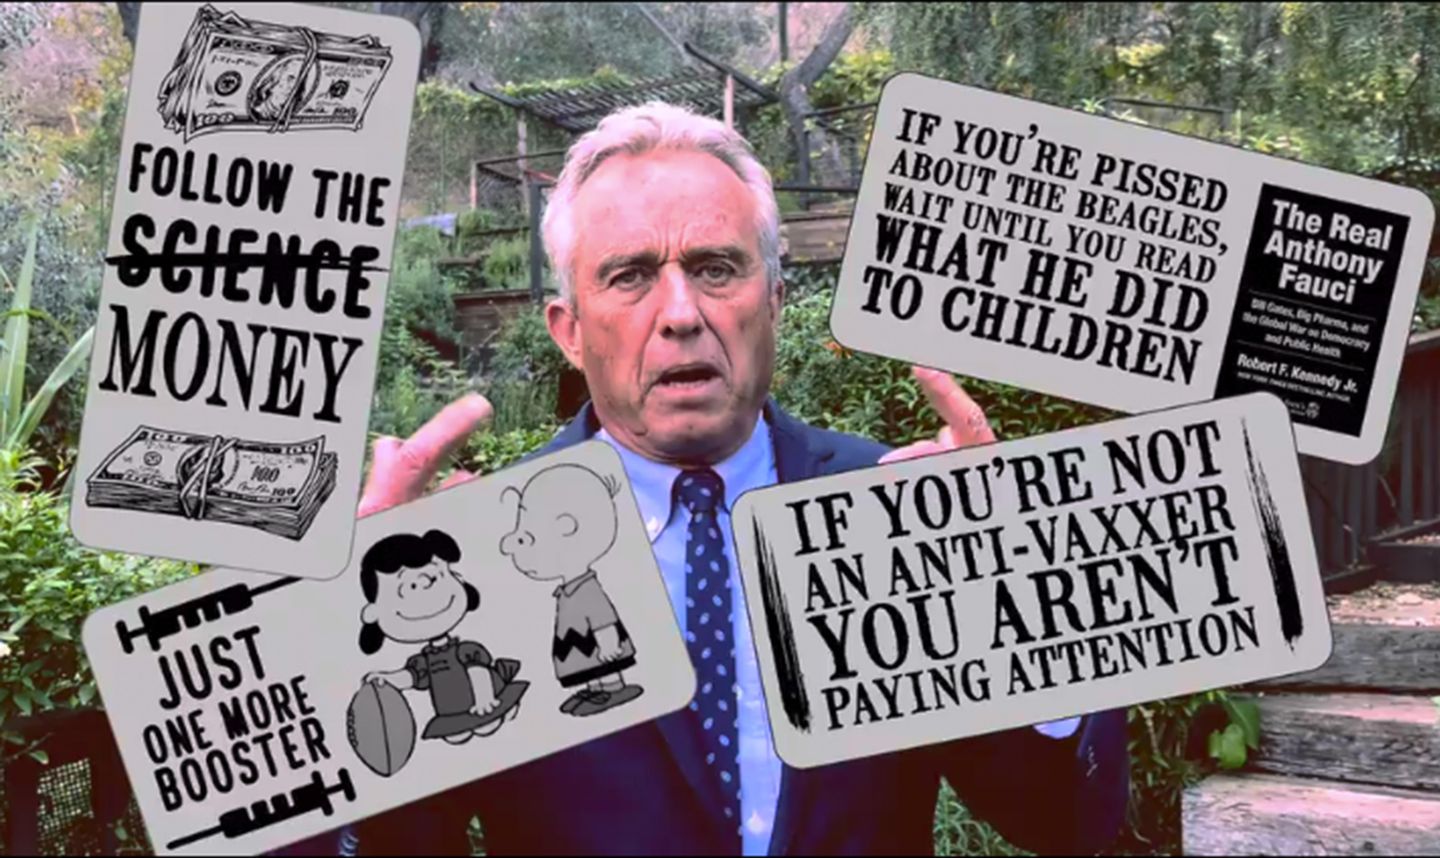 RFK Jr. says he's not anti-vaccine. His record shows the opposite. It's one of many inconsistencies